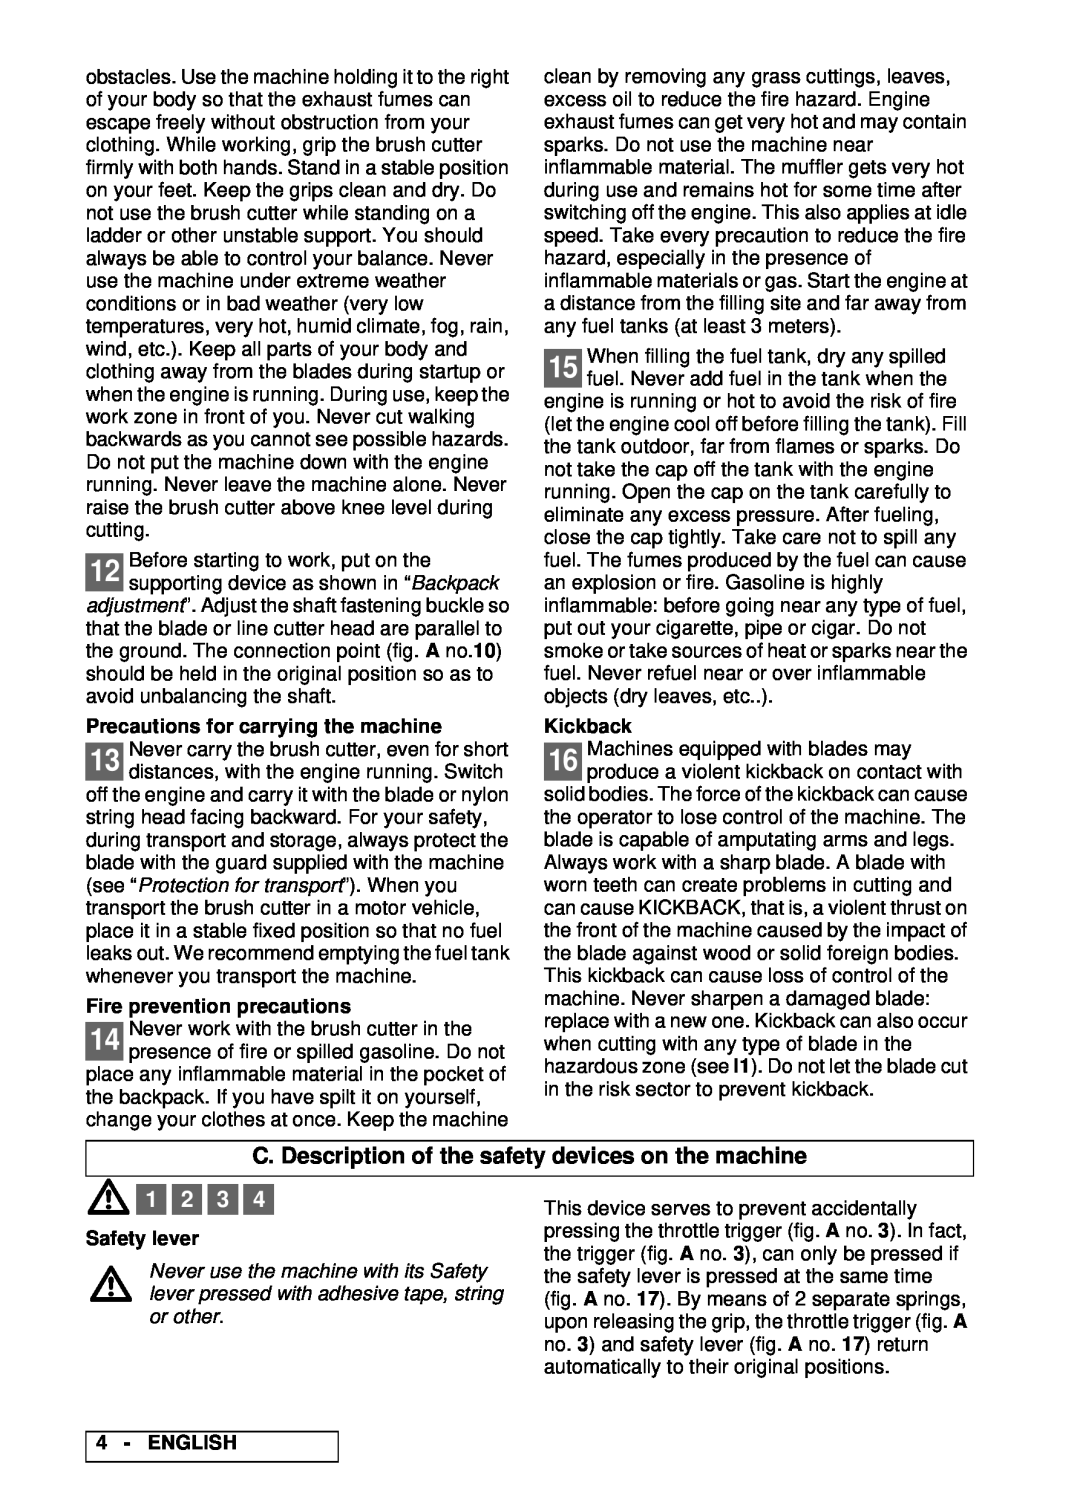 Husqvarna 2.010 BP C. Description of the safety devices on the machine, Precautions for carrying the machine, Kickback 